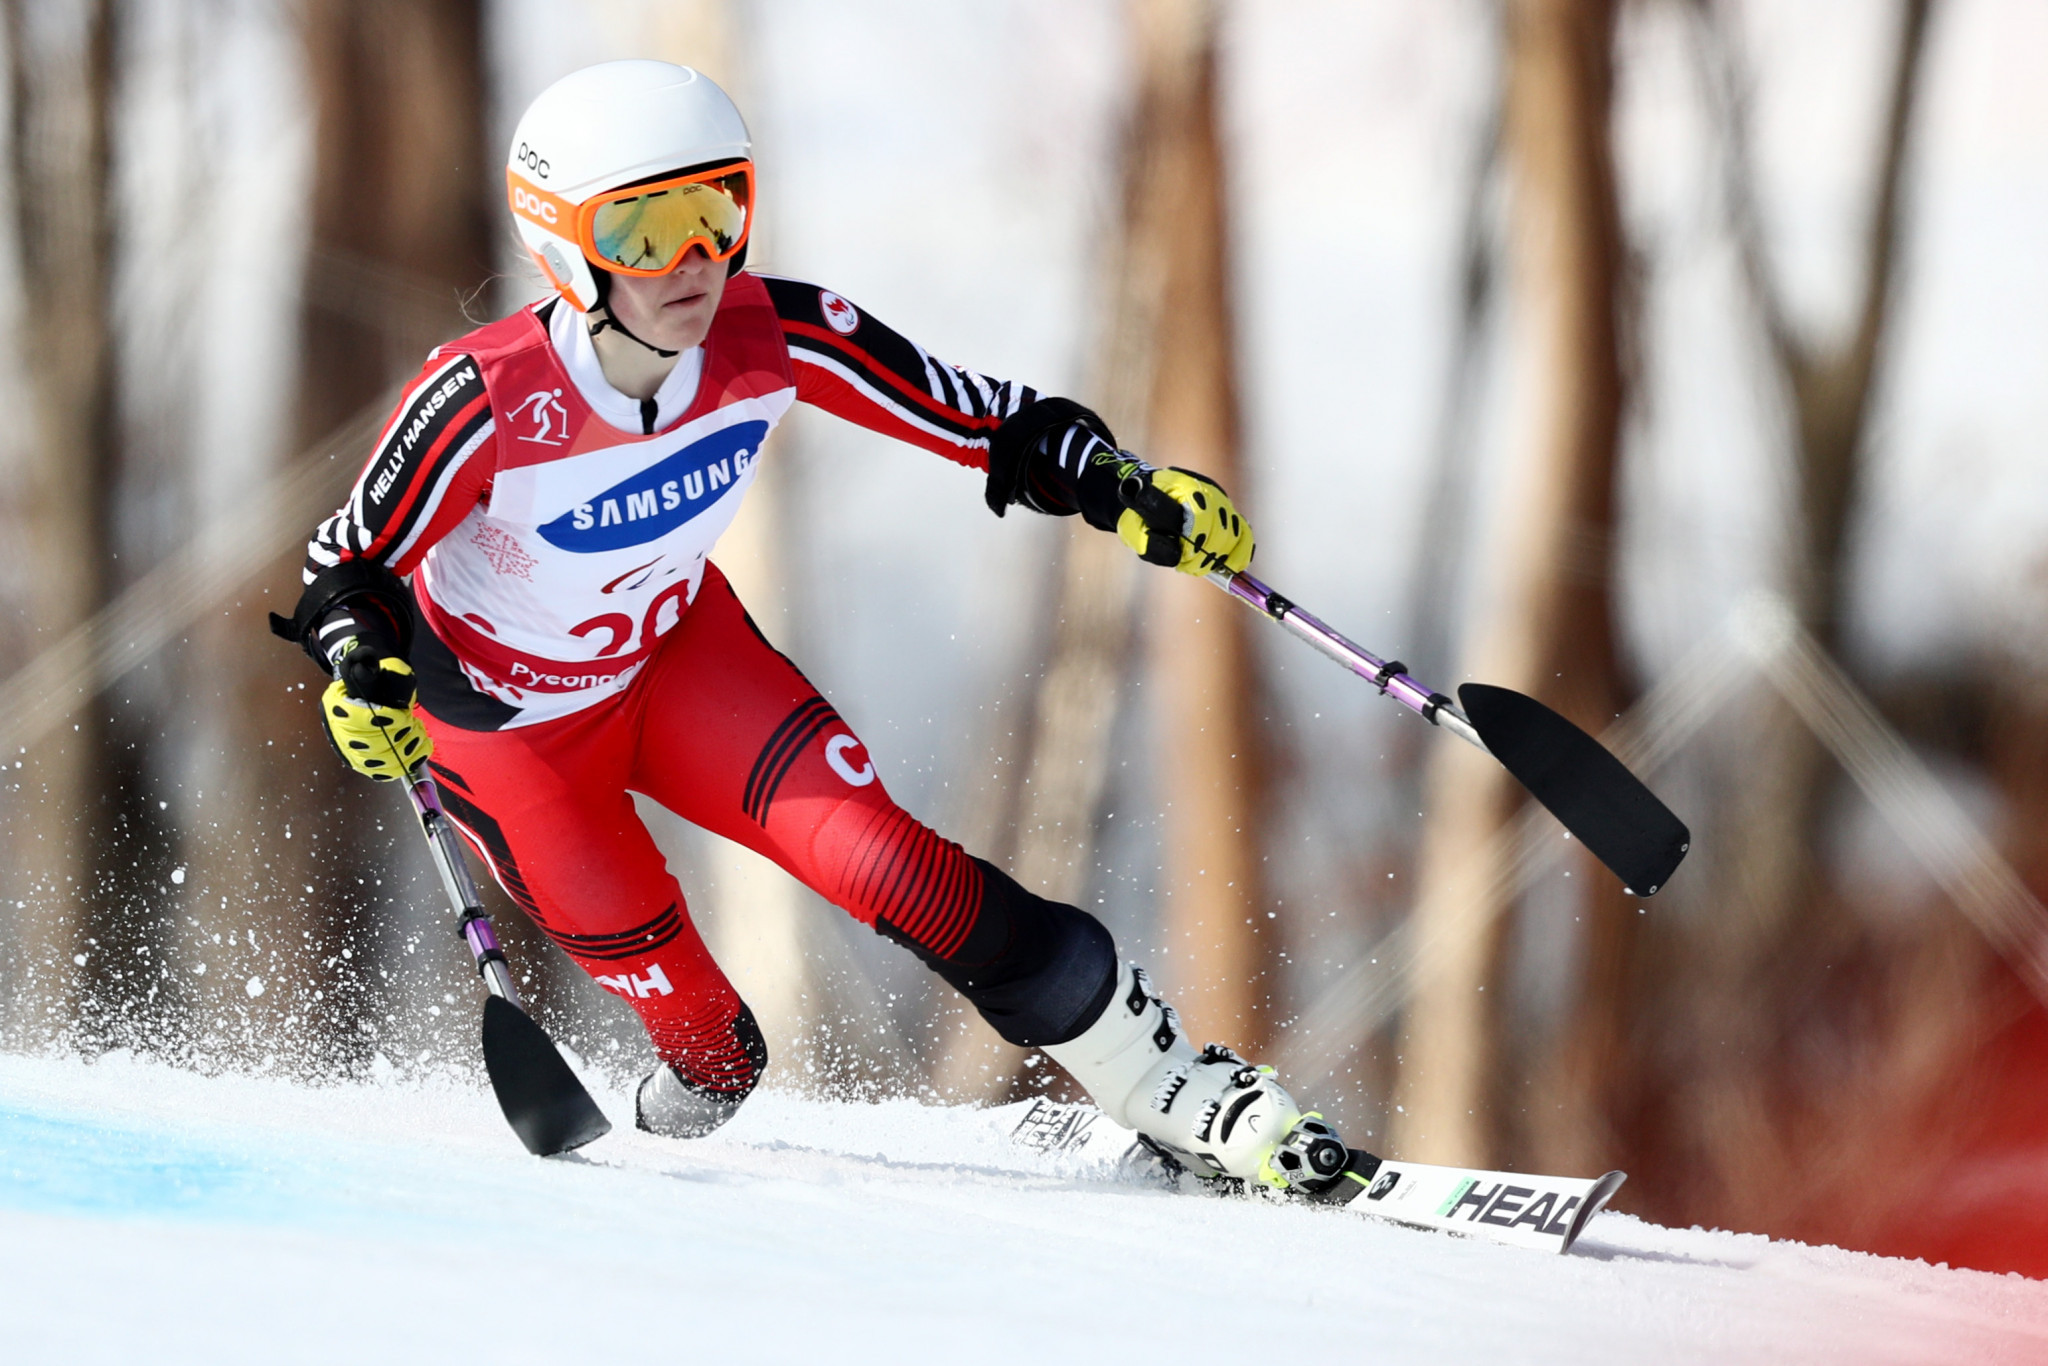 Canada's Turgeon secures first-ever World Para Alpine Skiing World Cup podium finish with victory in Zagreb